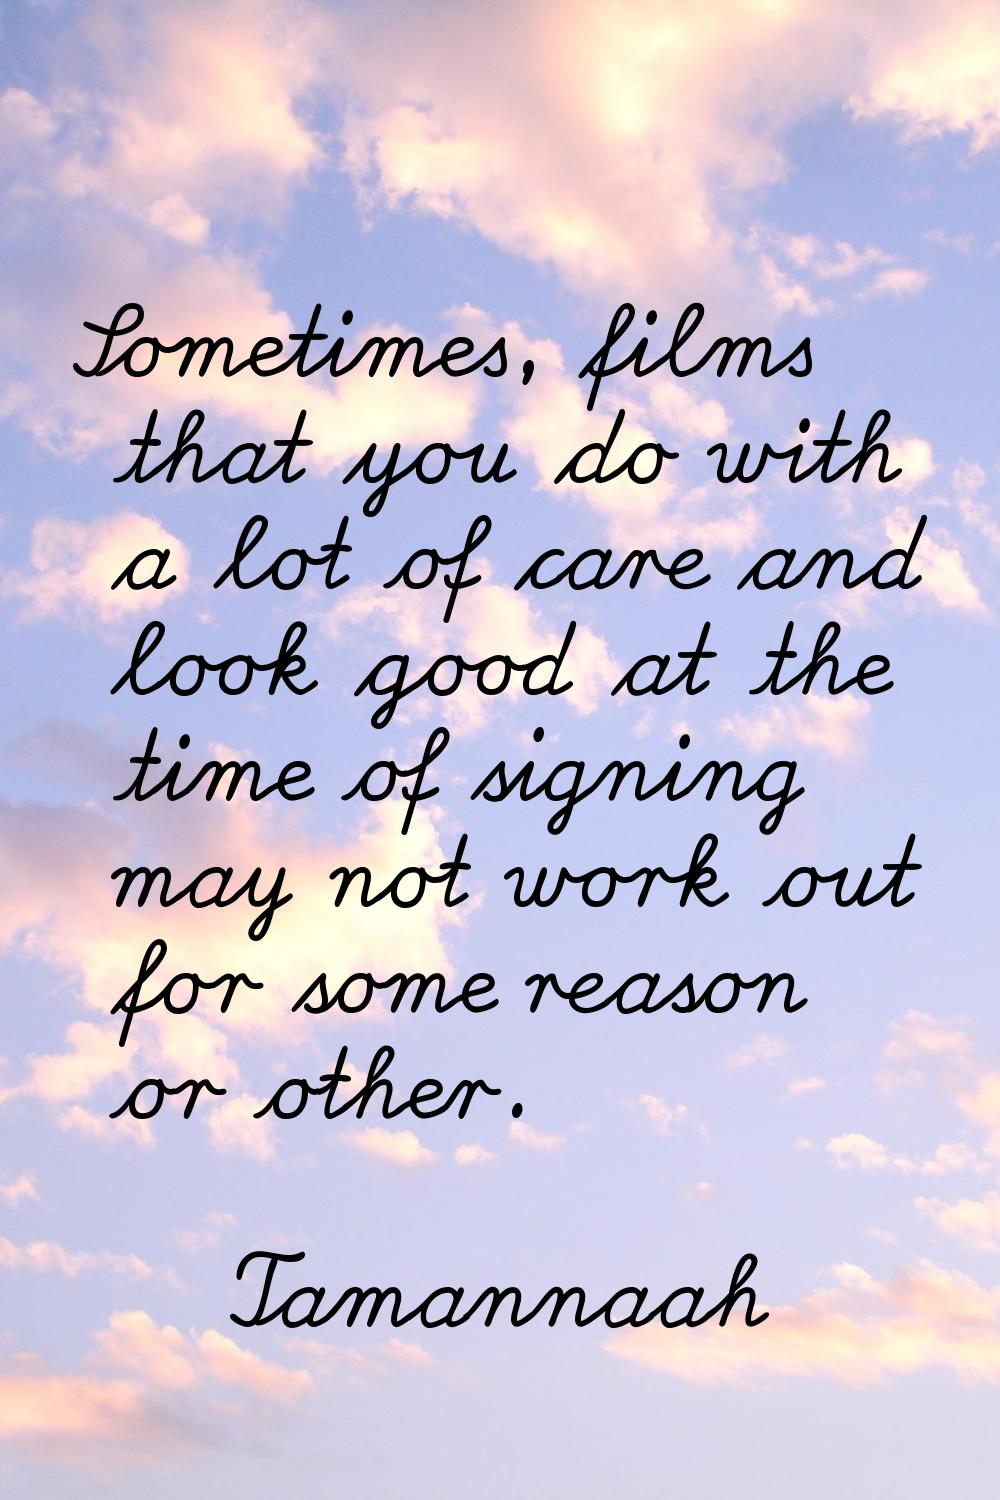 Sometimes, films that you do with a lot of care and look good at the time of signing may not work o